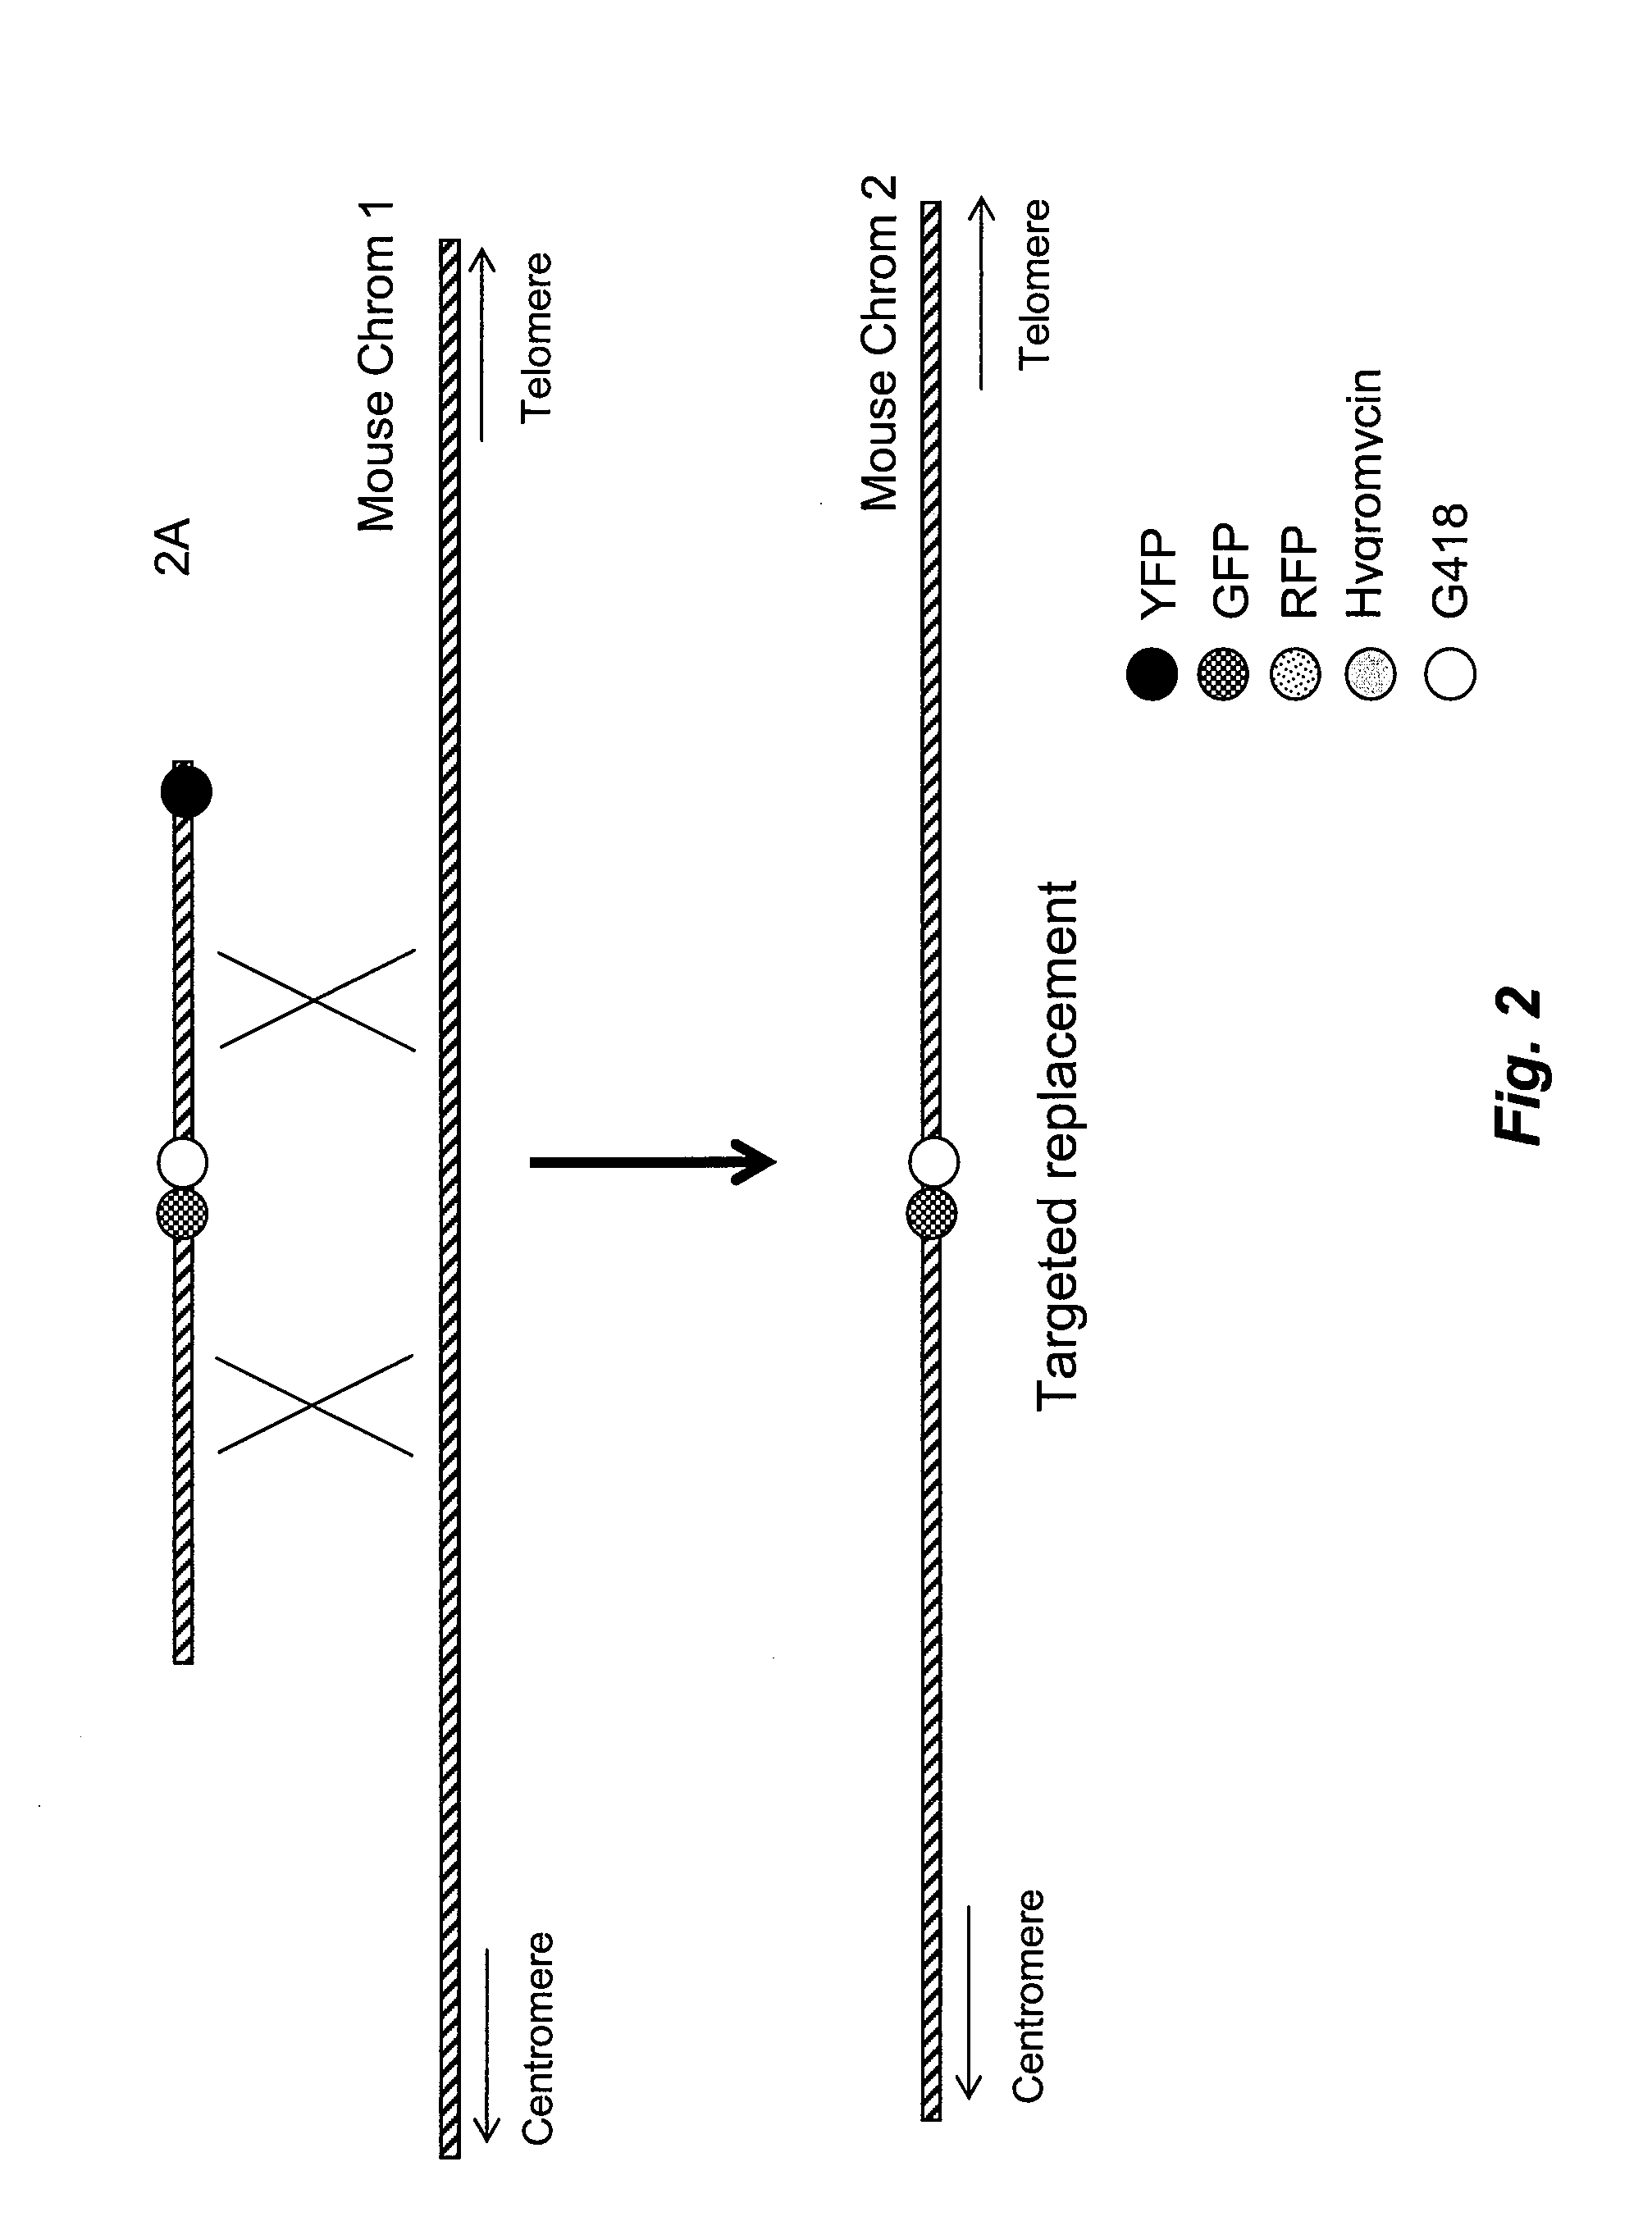 Methods for sequential replacement of targeted region by homologous recombination